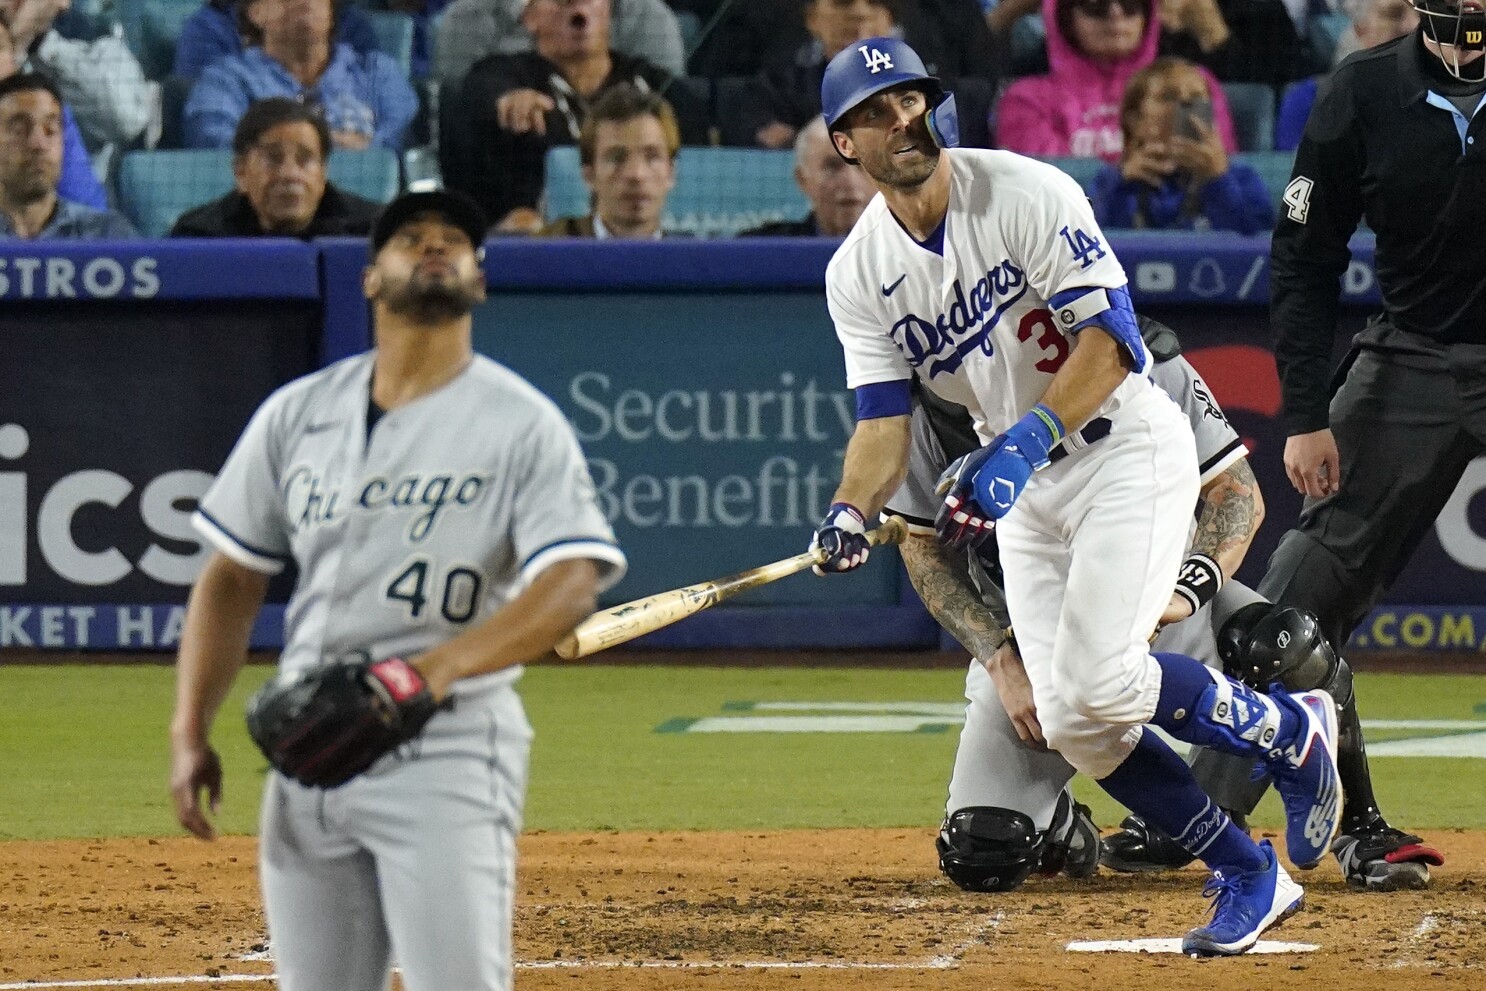 Dodgers place Chris Taylor on the injured list and expect Max